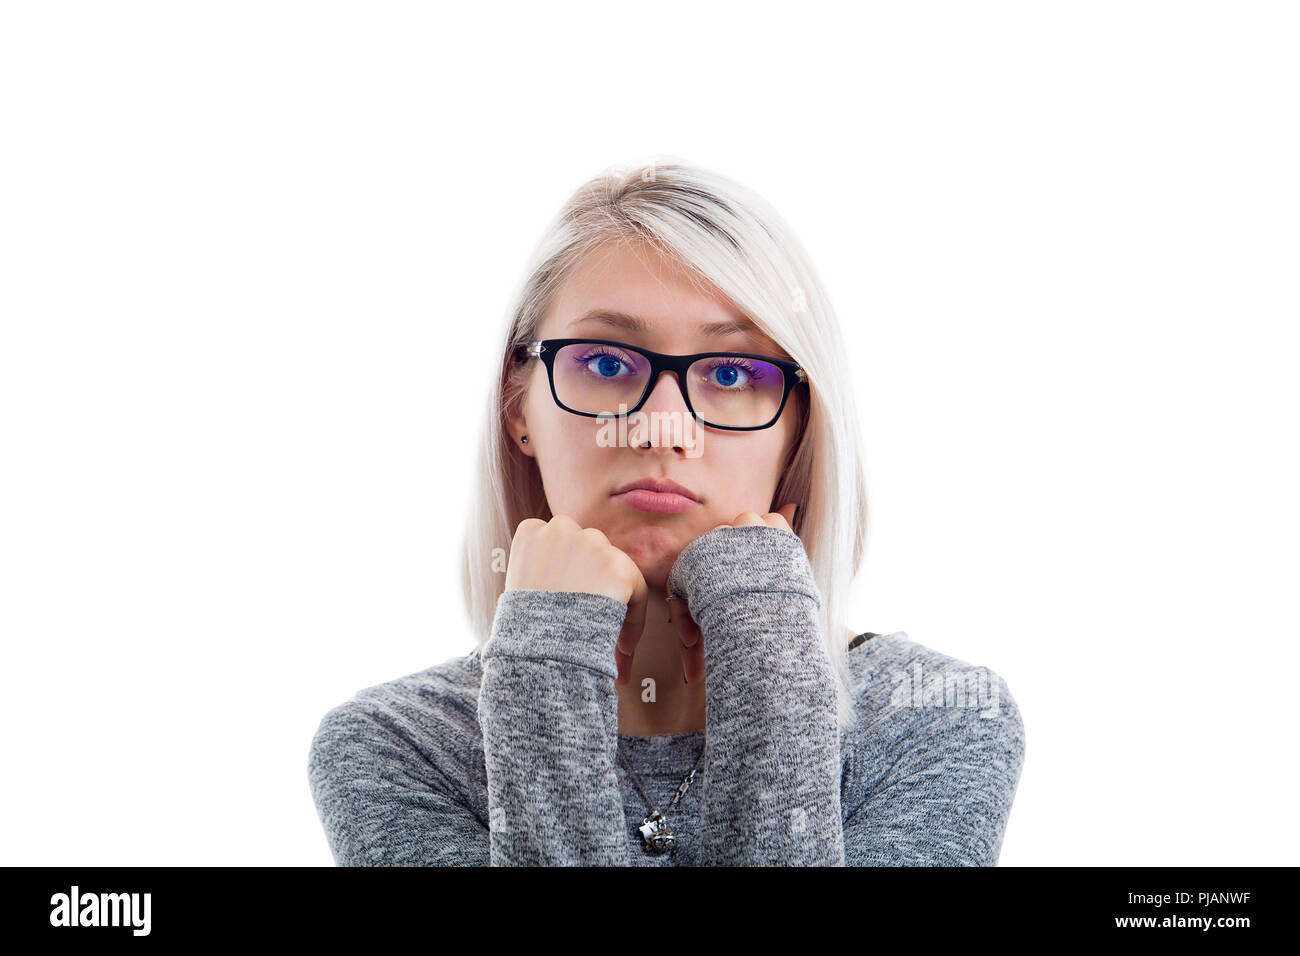 Bored woman wear glasses with both hands under chin looking to camera isolaed on white background. Sad human emotion, tired feeling. Unhappy expressio Stock Photo